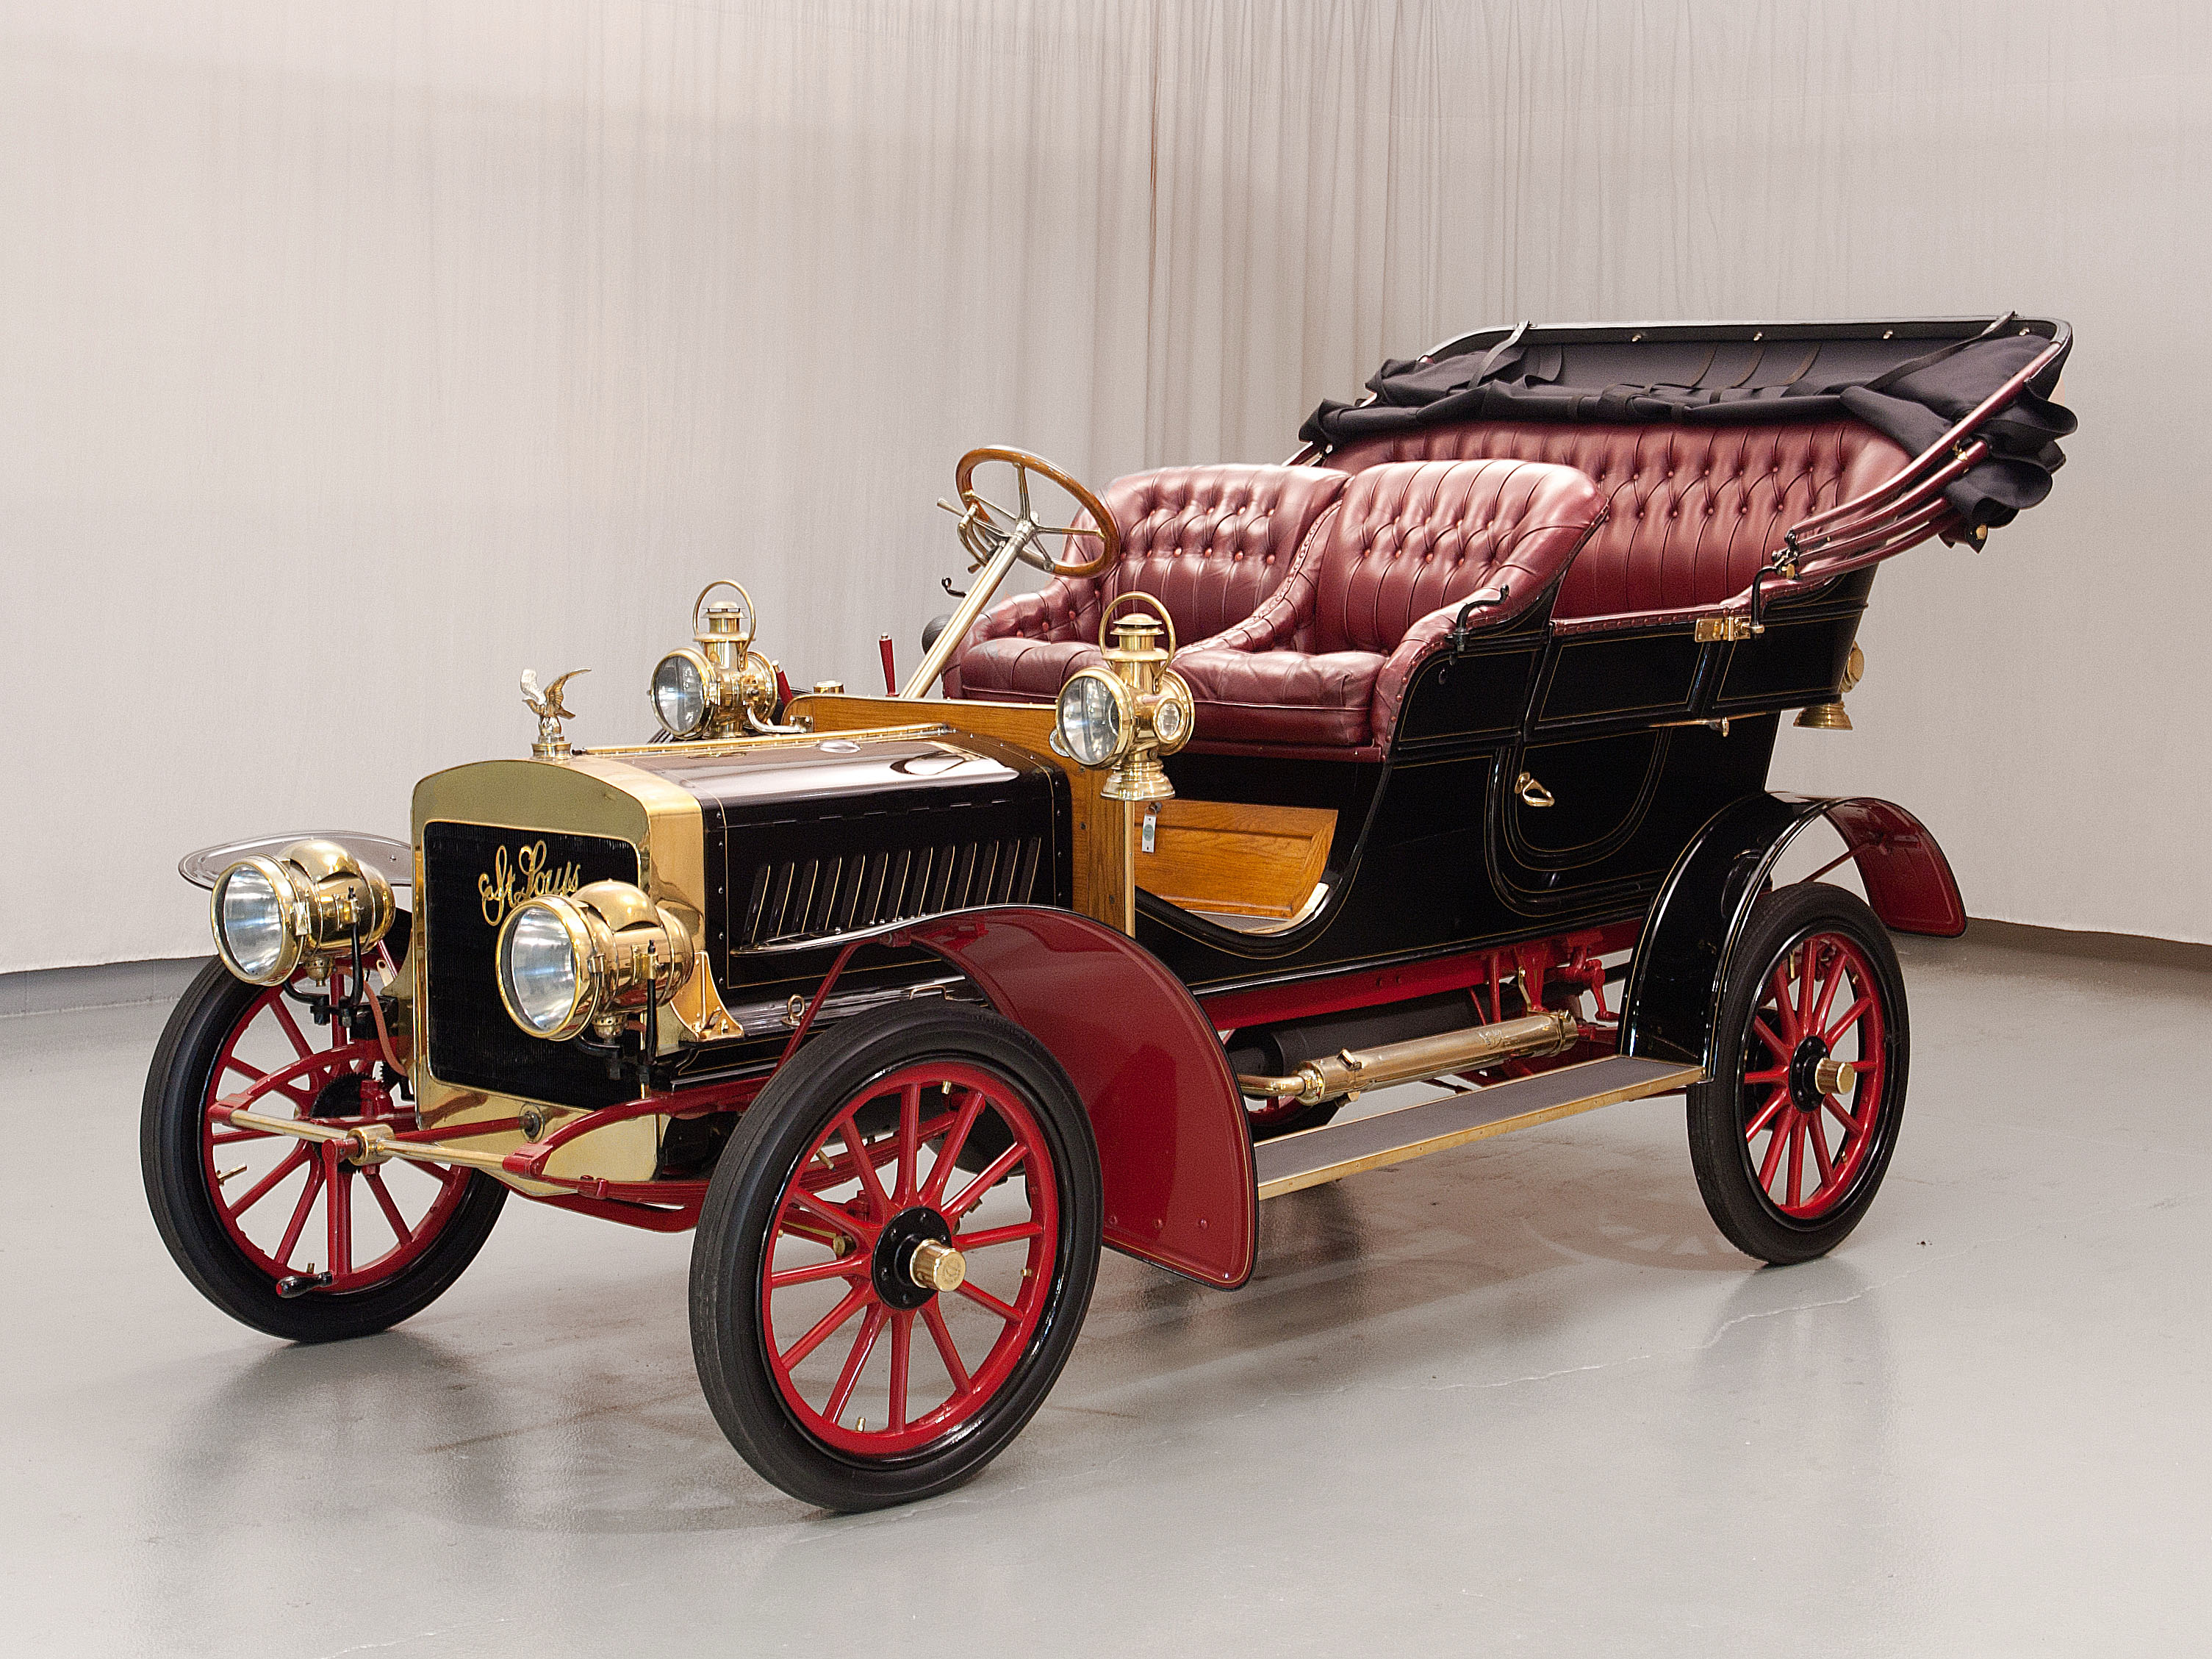 St. Louis Four-Cylinder | Classic Car Weekly